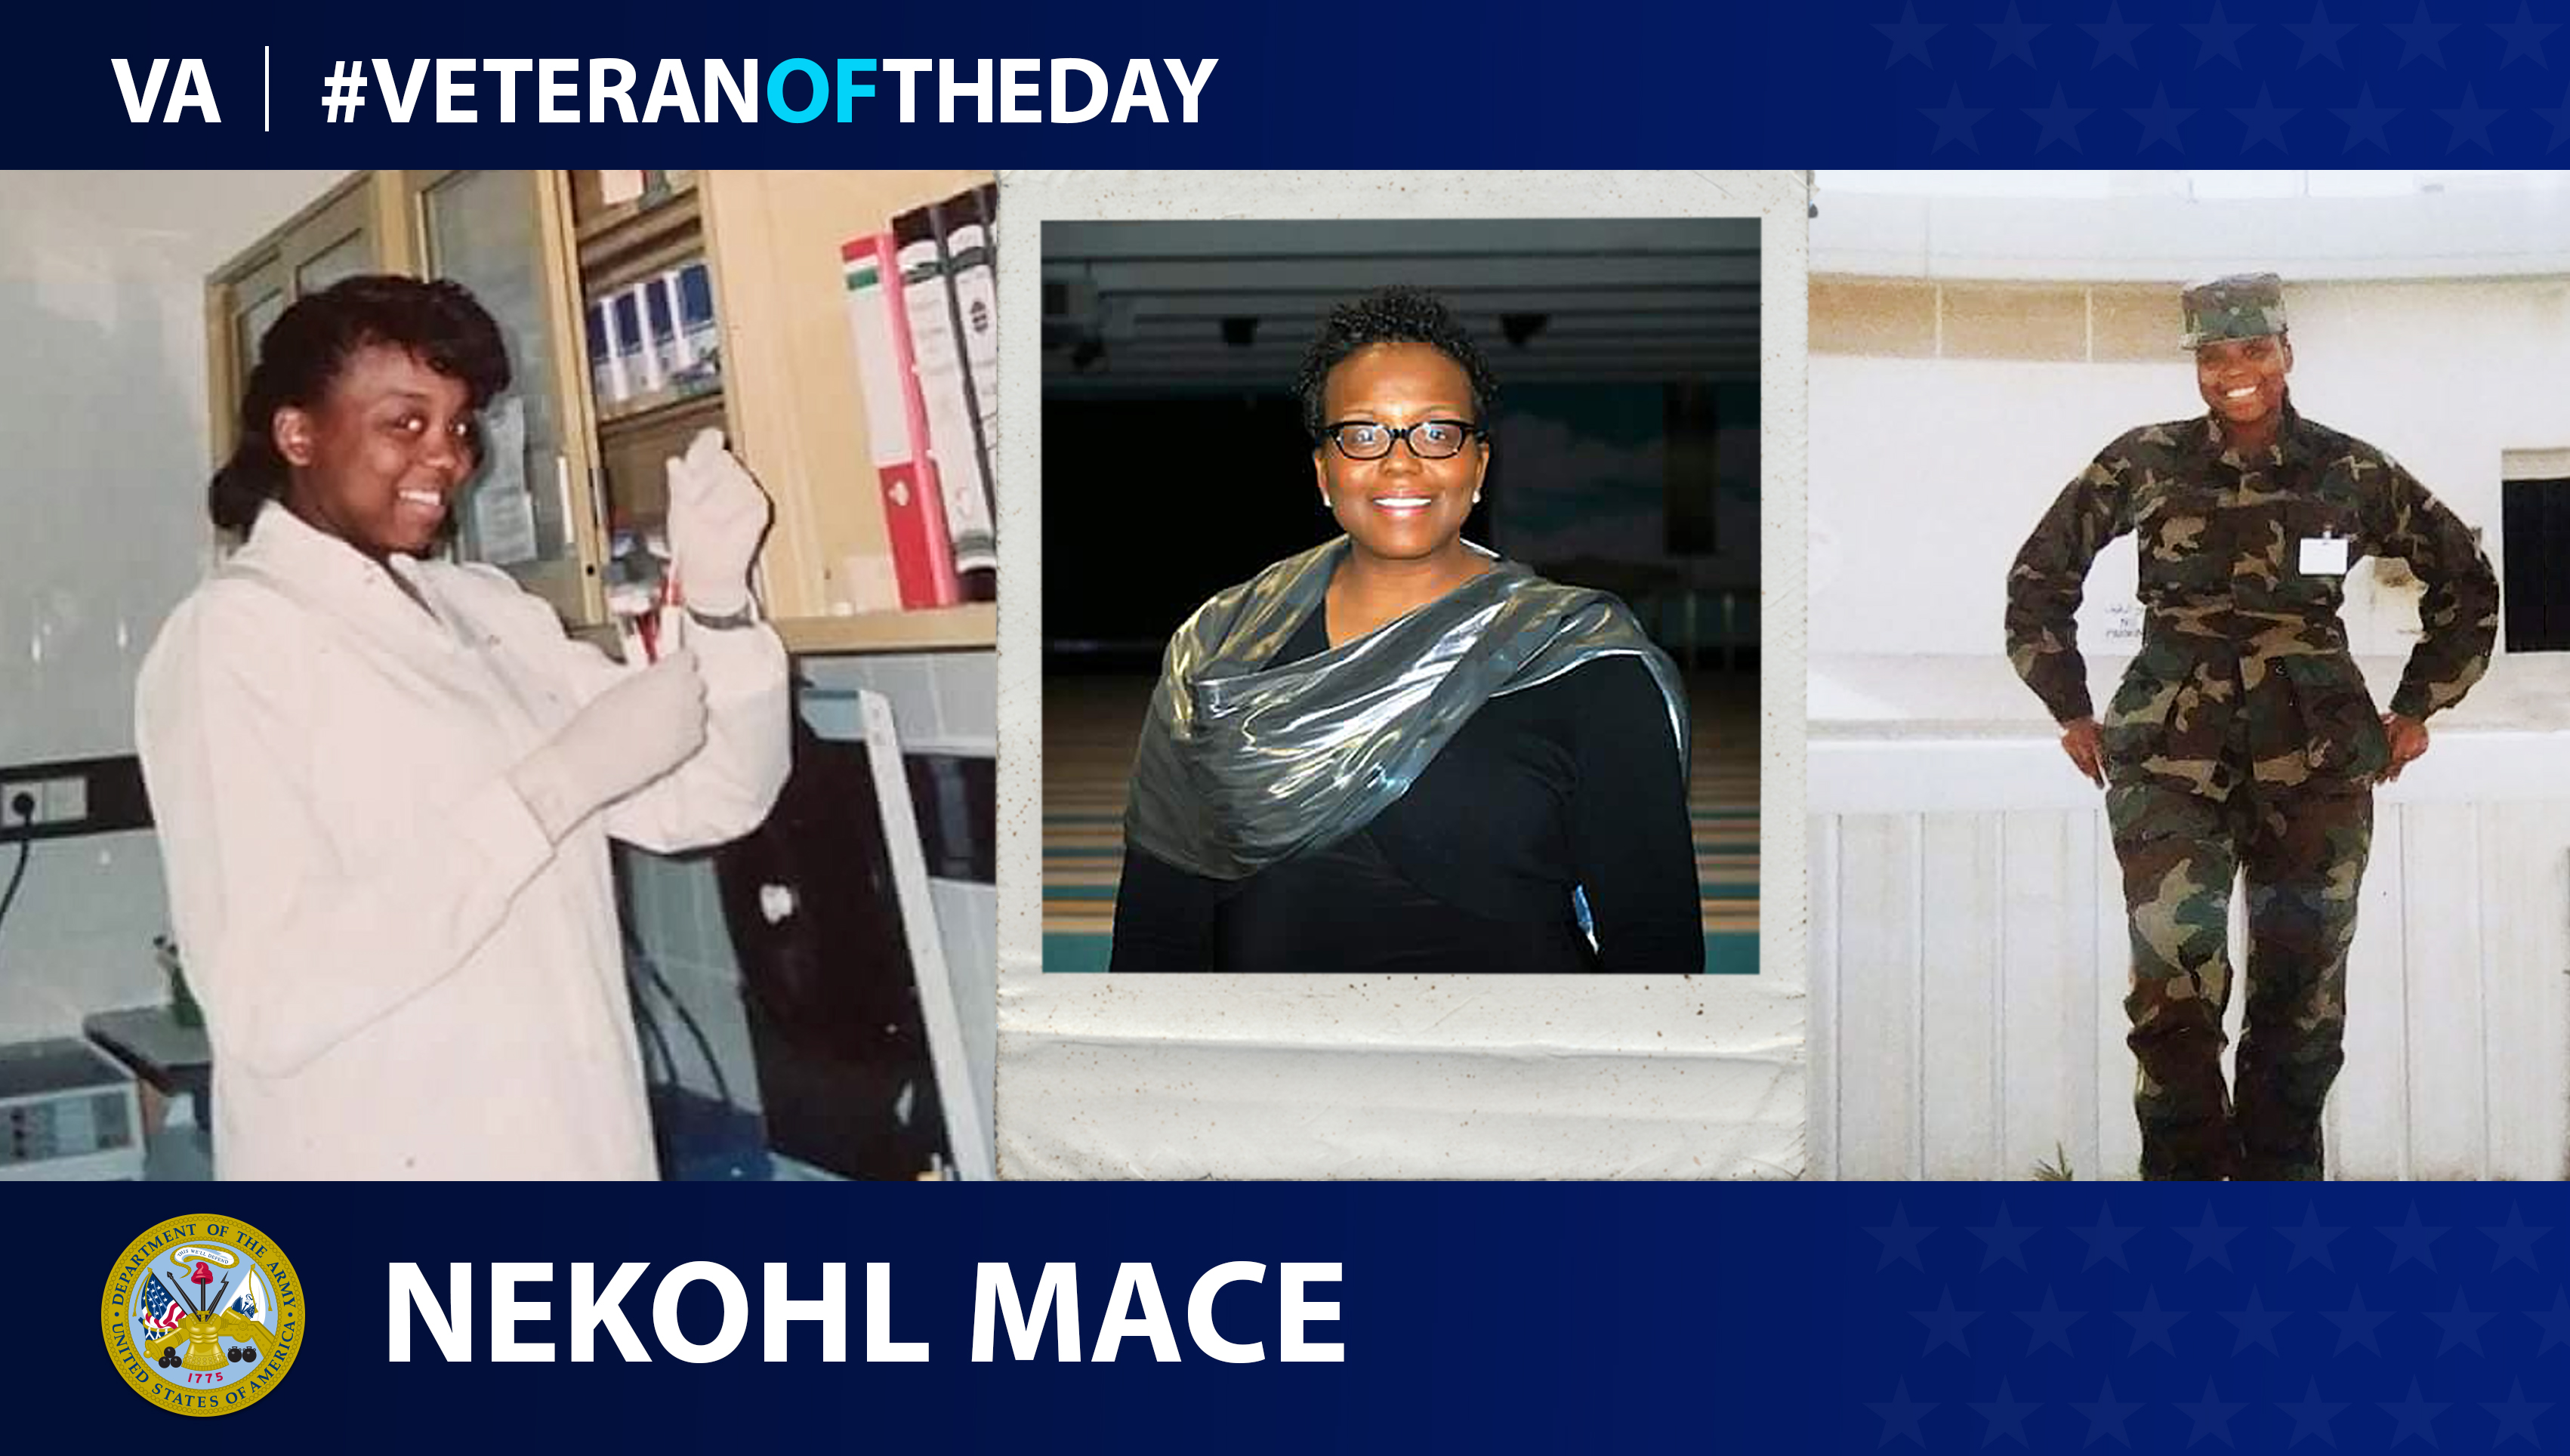 Army Veteran Nekohl Mace is today's Veteran of the Day.